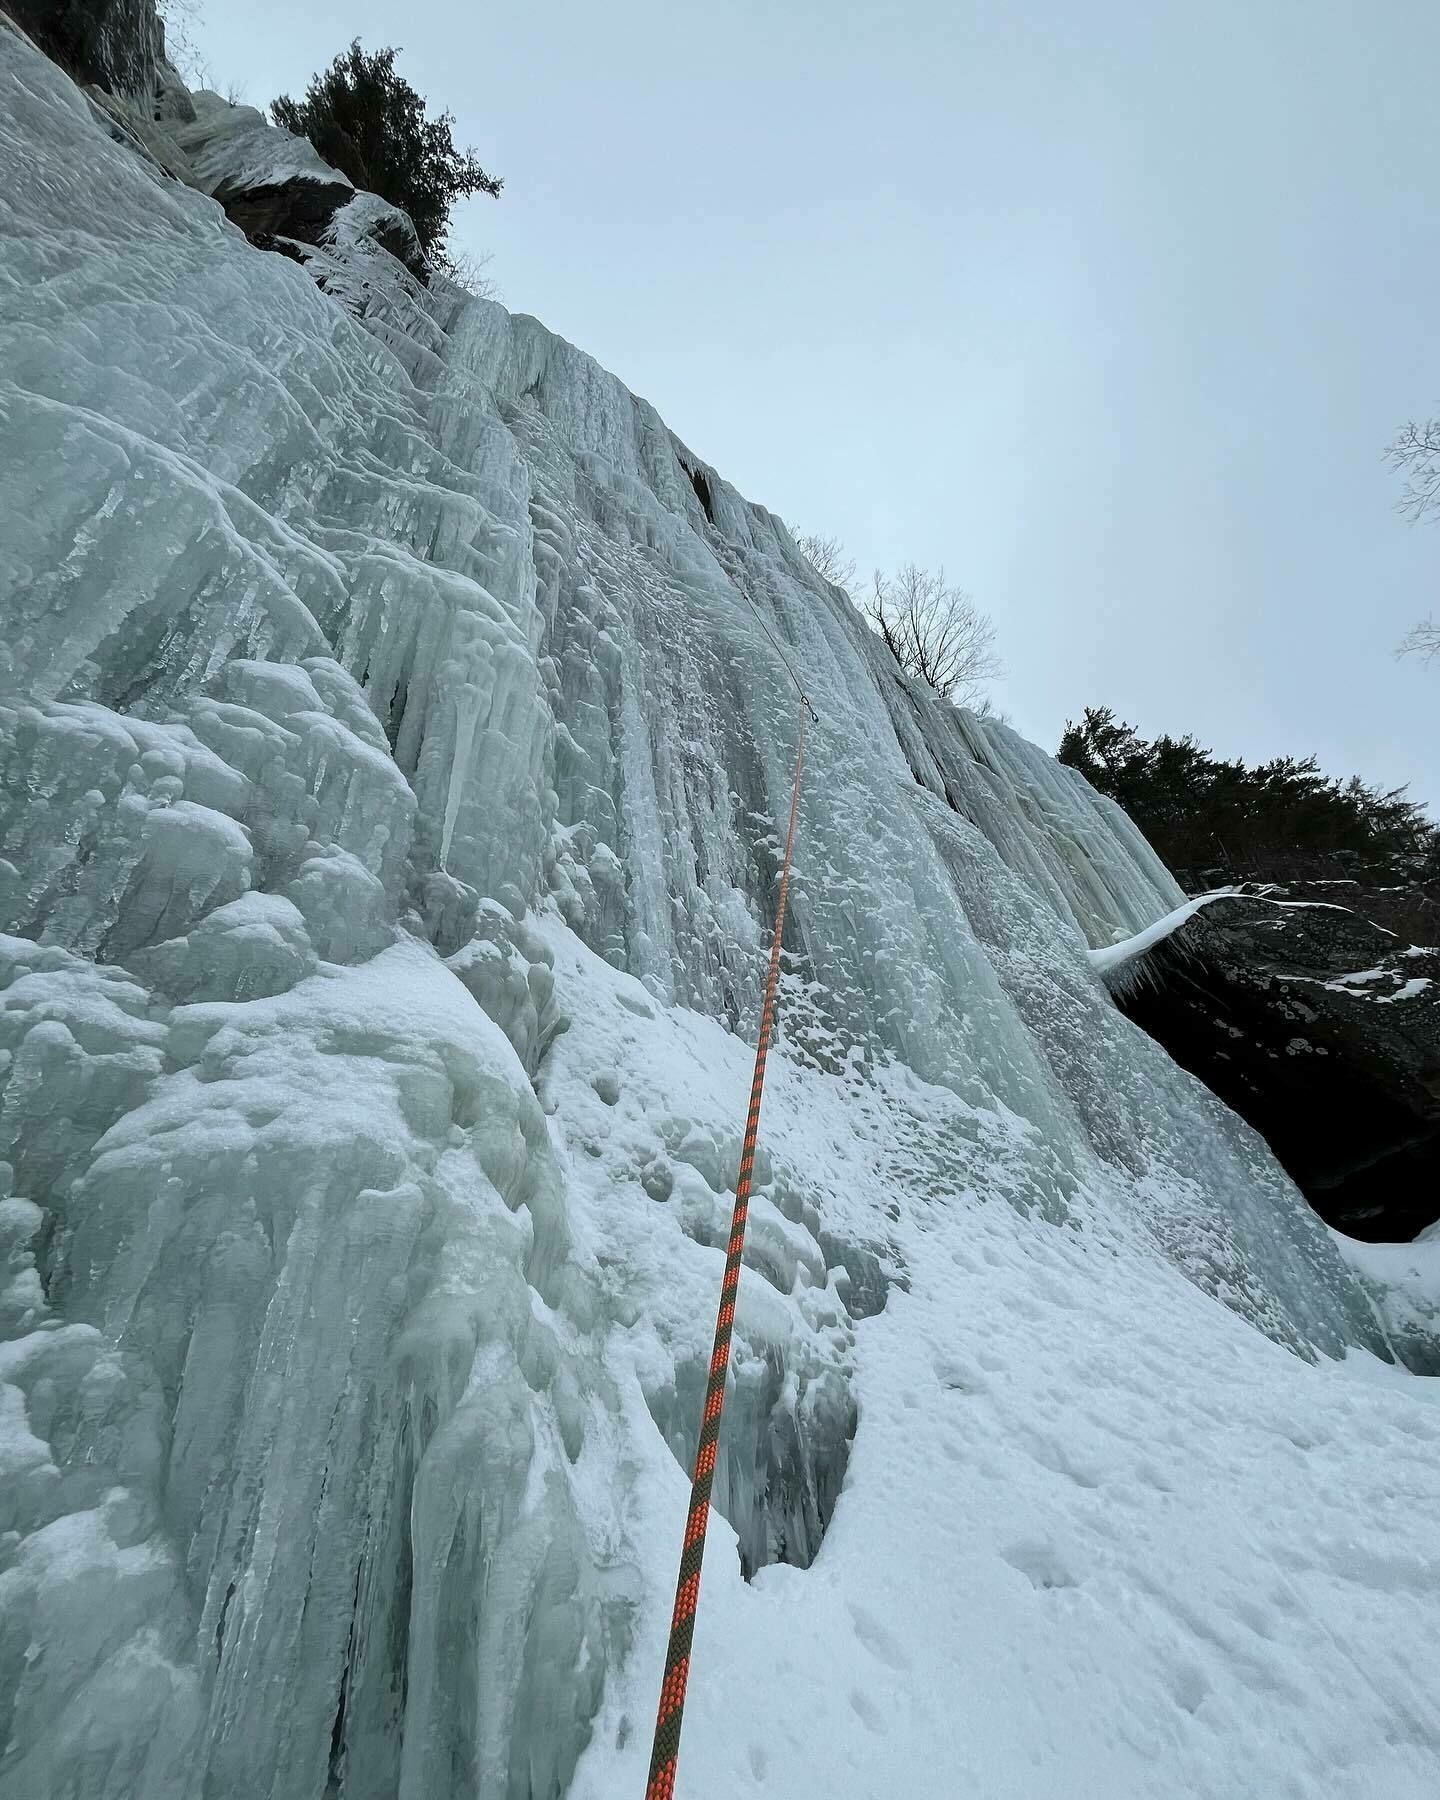 An orange climbing rope stretches up a steep, frozen waterfall with intricate ice formations, set against a forested backdrop.